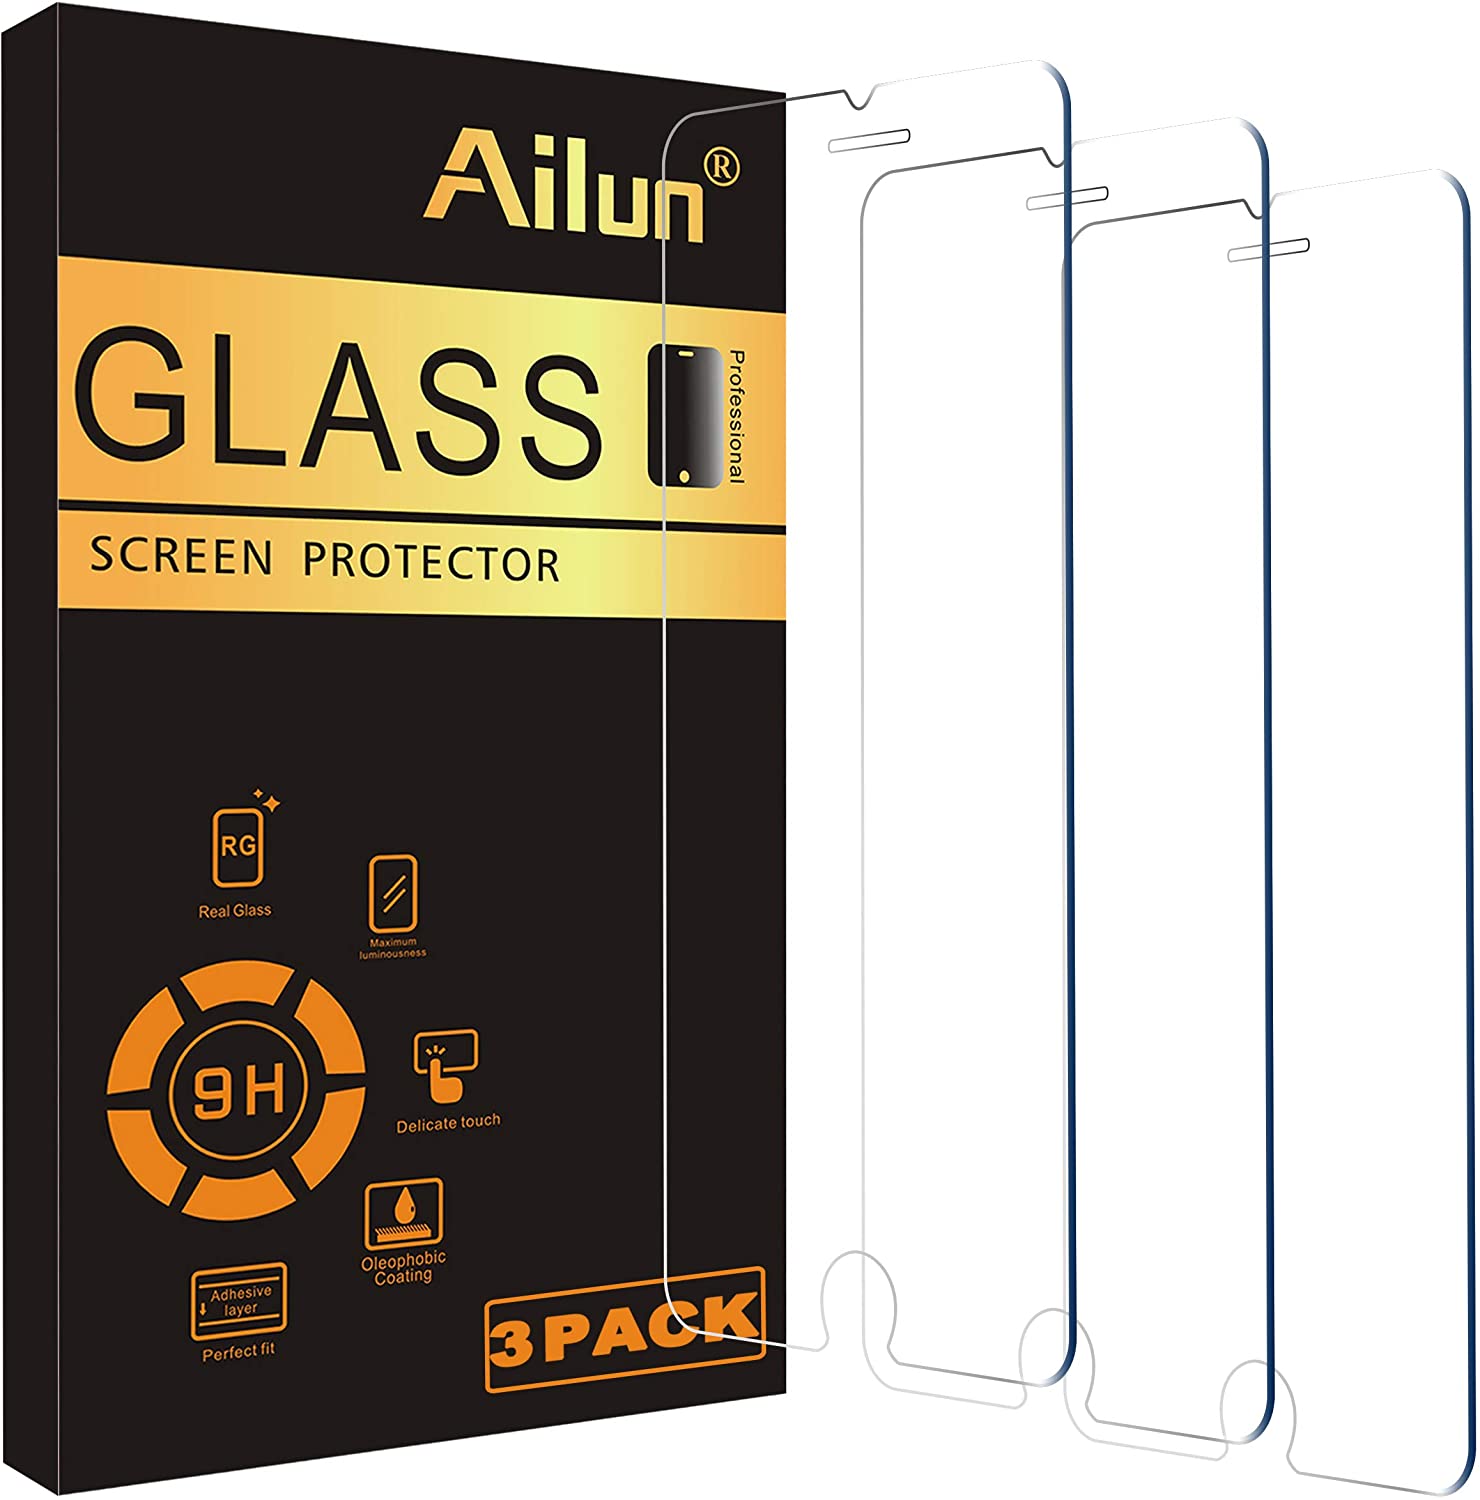 Ailun High-Definition iPhone Screen Protectors, 3-Pack